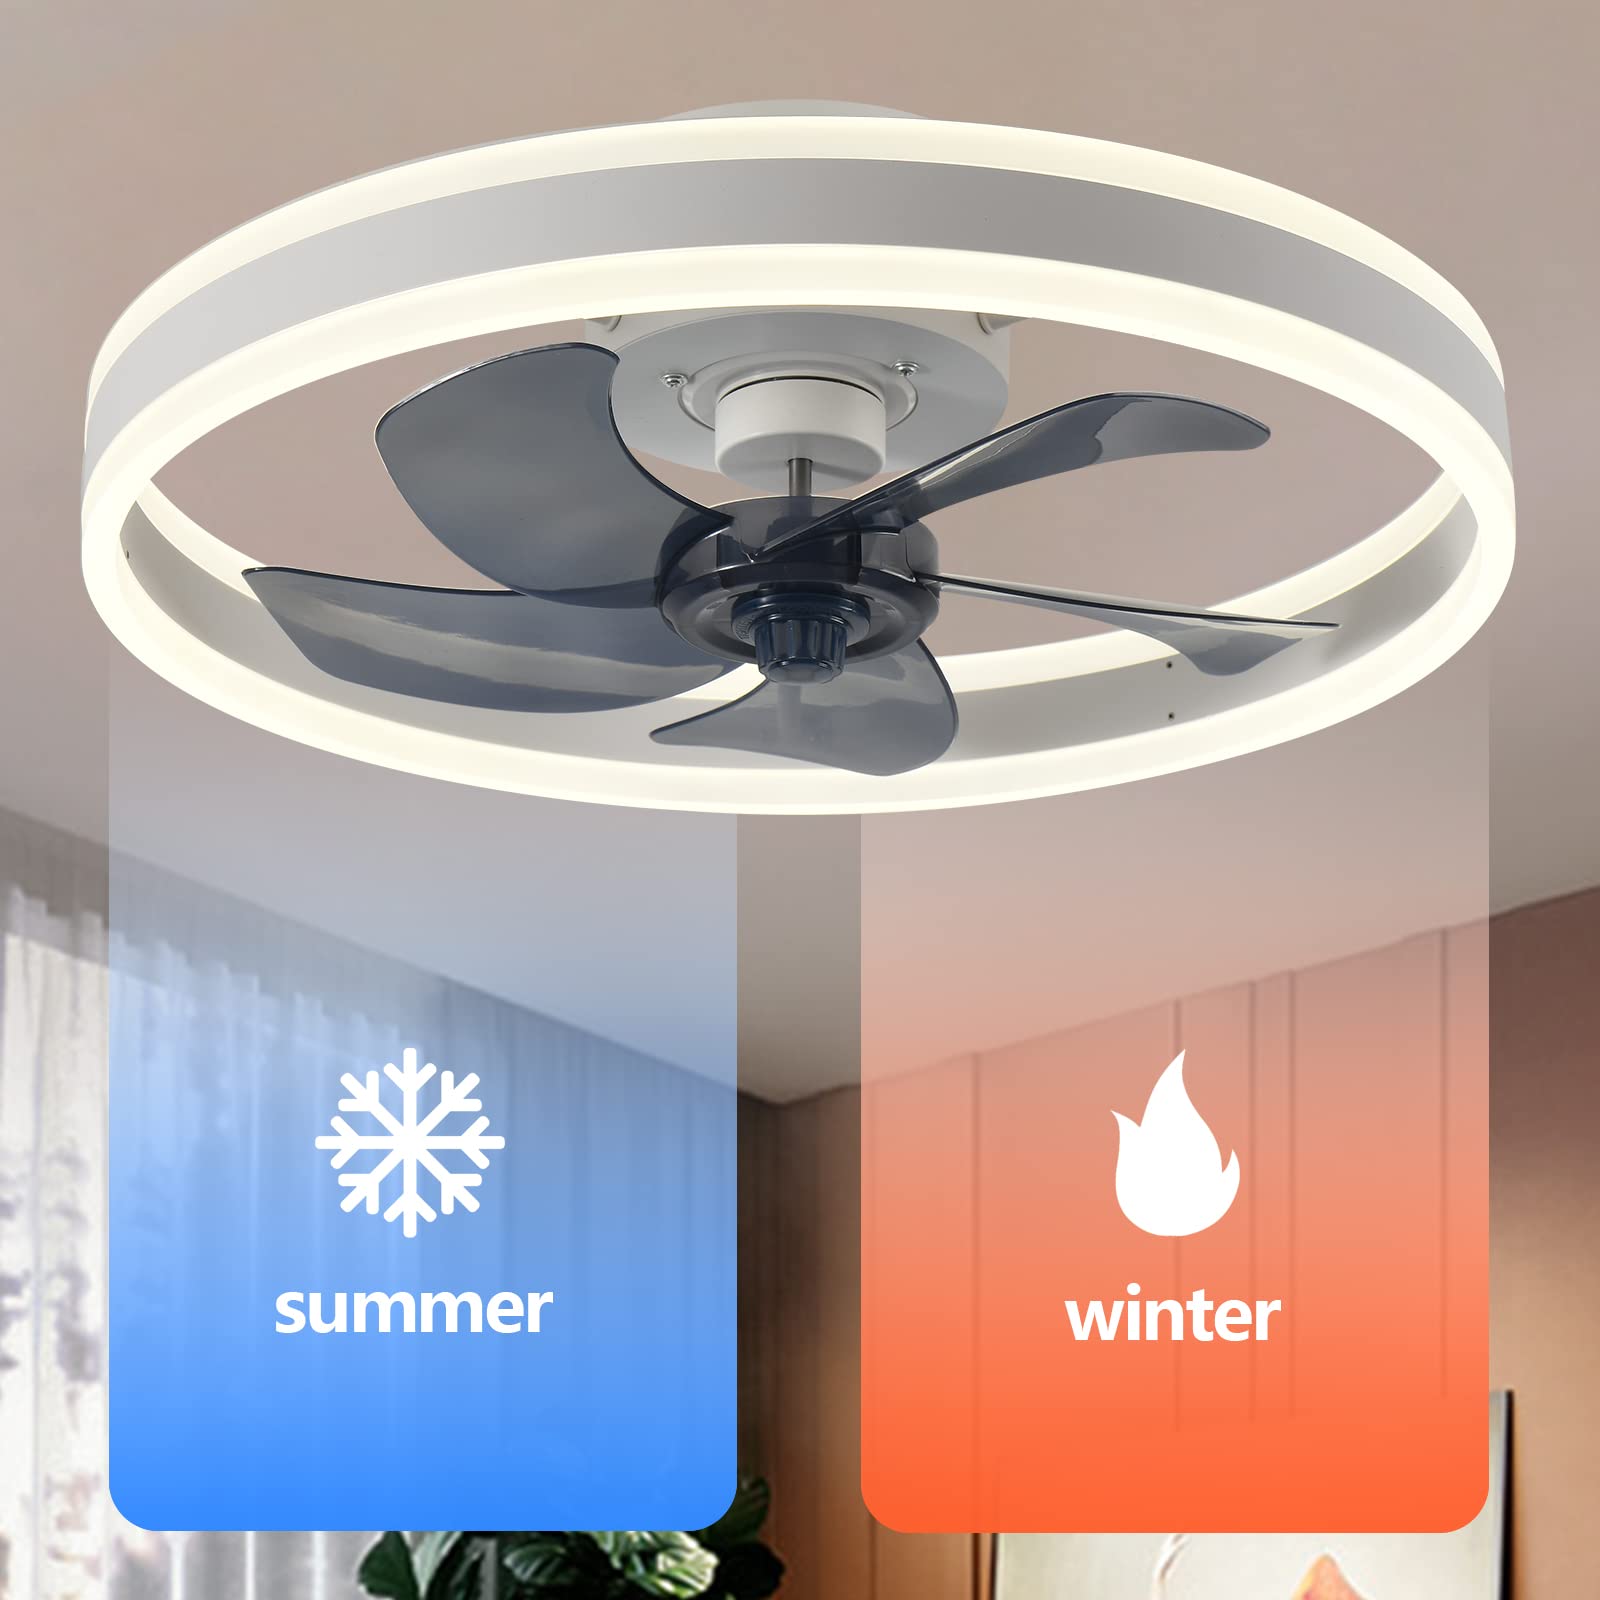 AHAWILL Modern Contemporary Ceiling Fan with Light,Mute LED Dimmable with Remote Control,6 Speeds Reversible 60W for Bedroom,Study Room,Dining Room,etc.(19.7